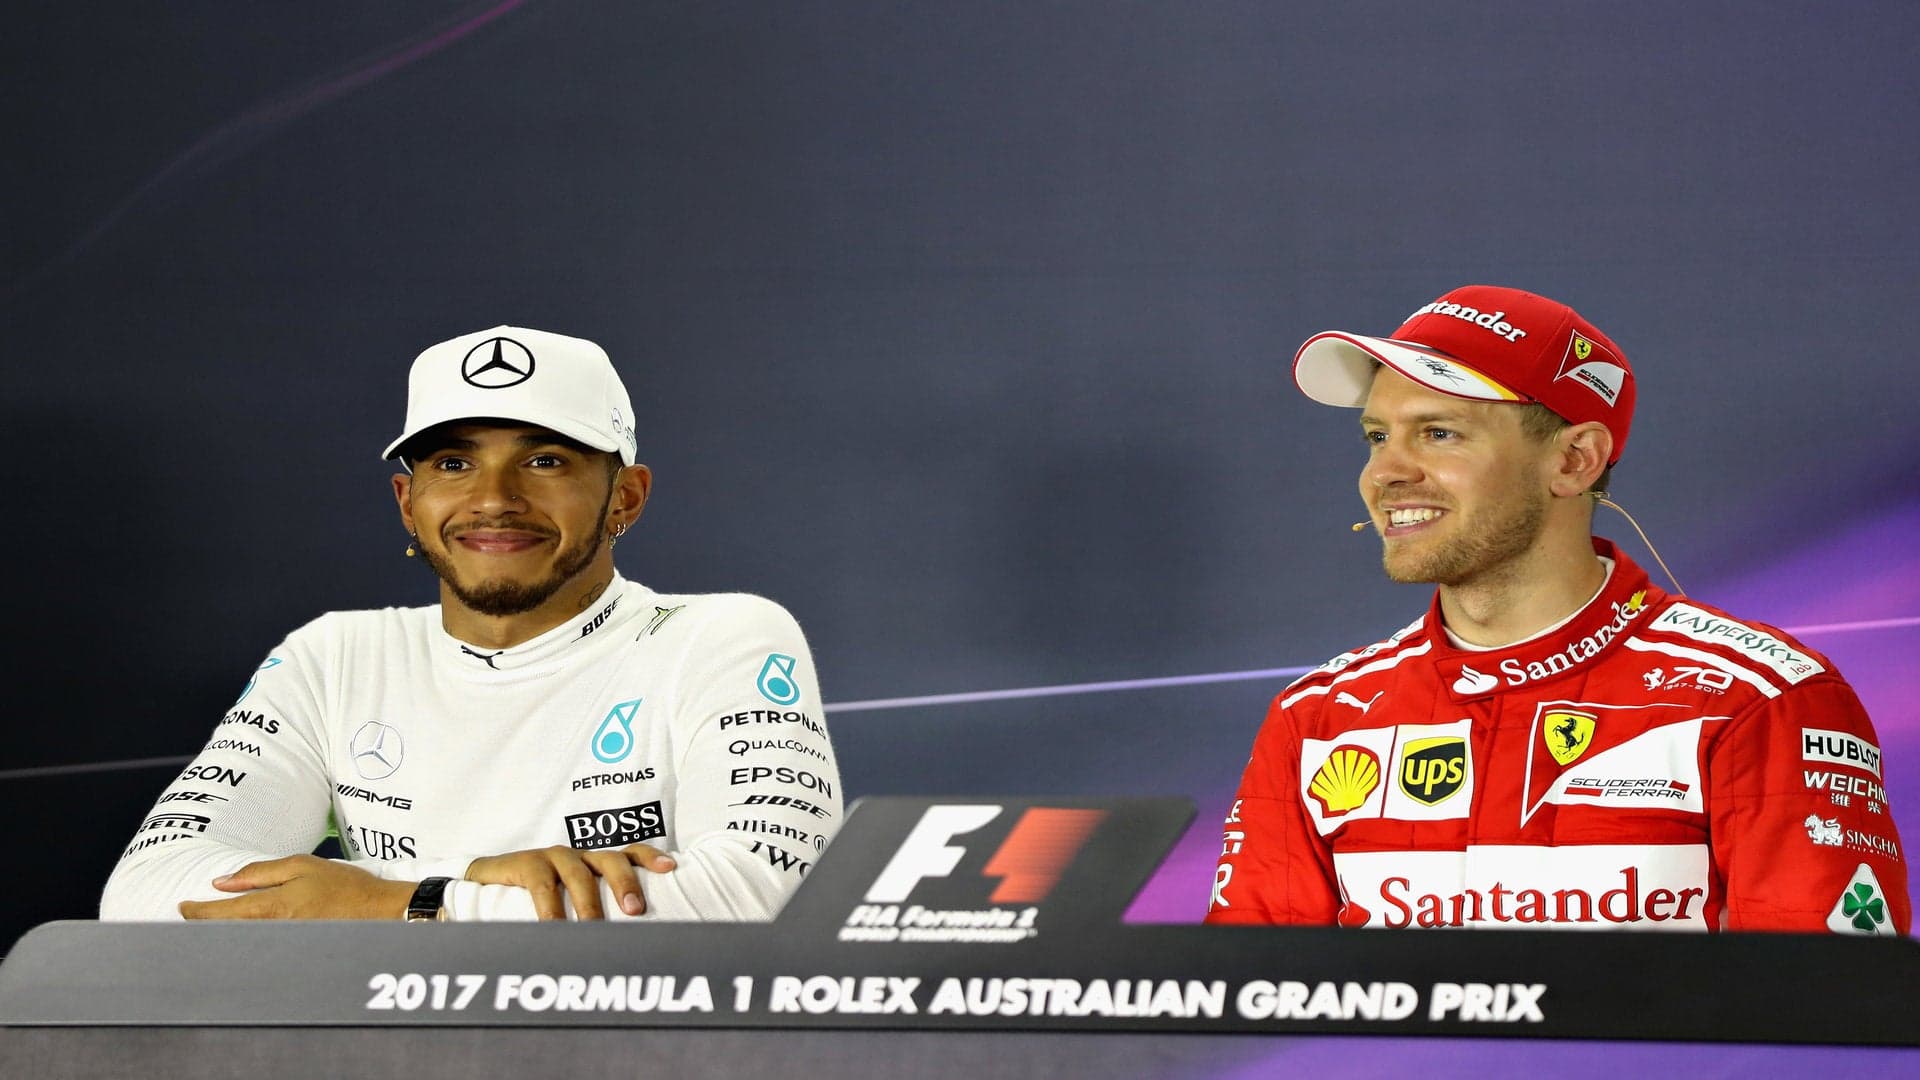 Chinese GP: Mercedes Won, McLaren Blew It, and Other Non-Surprises